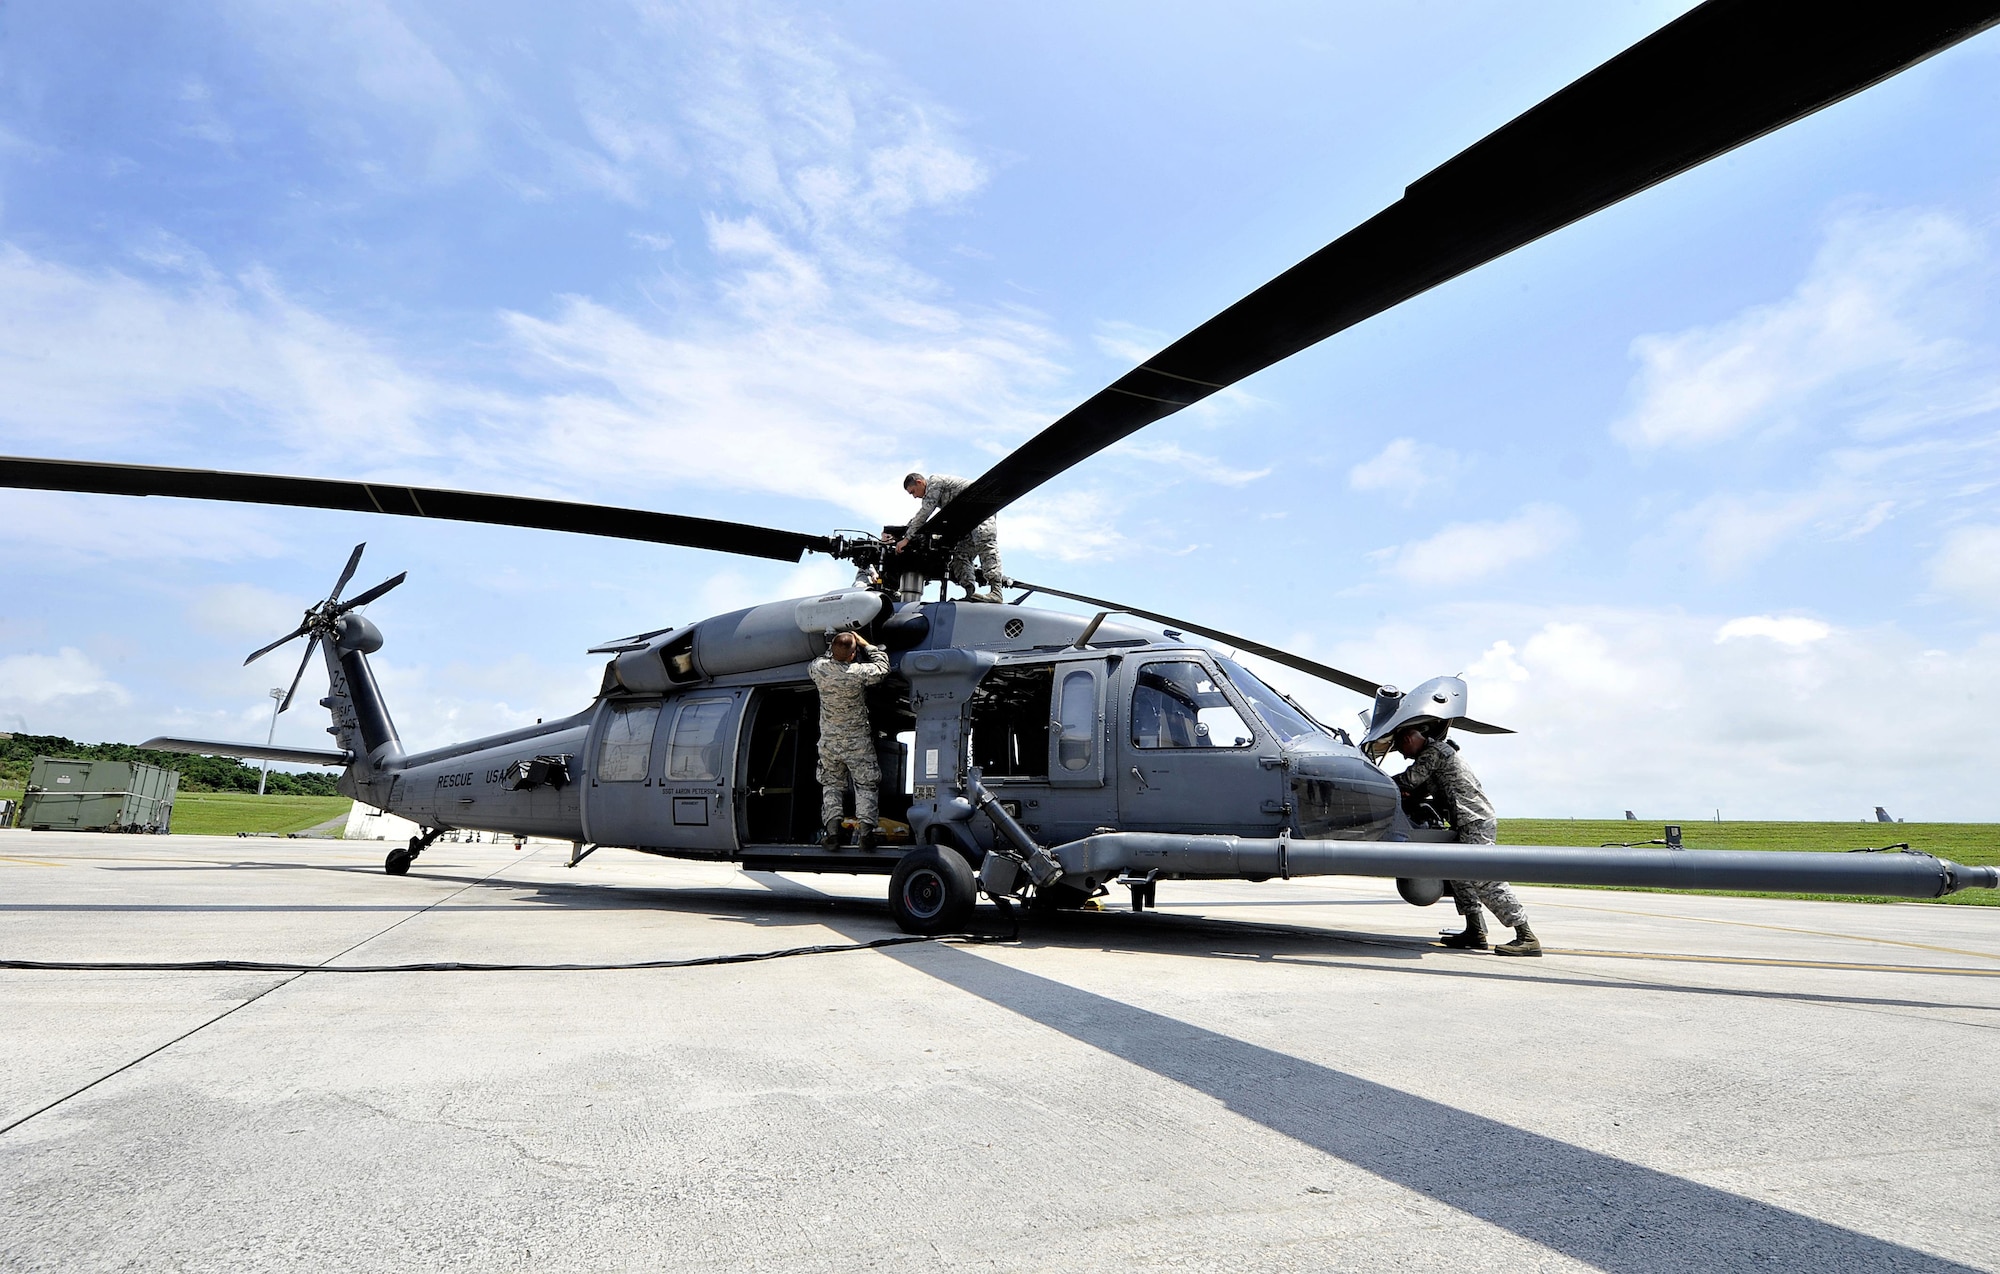 Members of the 718th Aircraft Maintenance Squadron inspect an HH-60G Pave Hawk helicopter during a pre-flight inspection, April 26, 2016, at Kadena Air Base, Japan. The 718th Aircraft Maintenance Squadron maintains military aircraft for flight to ensure safety and reliability in support of the training mission here at Kadena. These inspections are conducted 72 hours before each mission. (U.S. Air Force photo by Naoto Anazawa)
